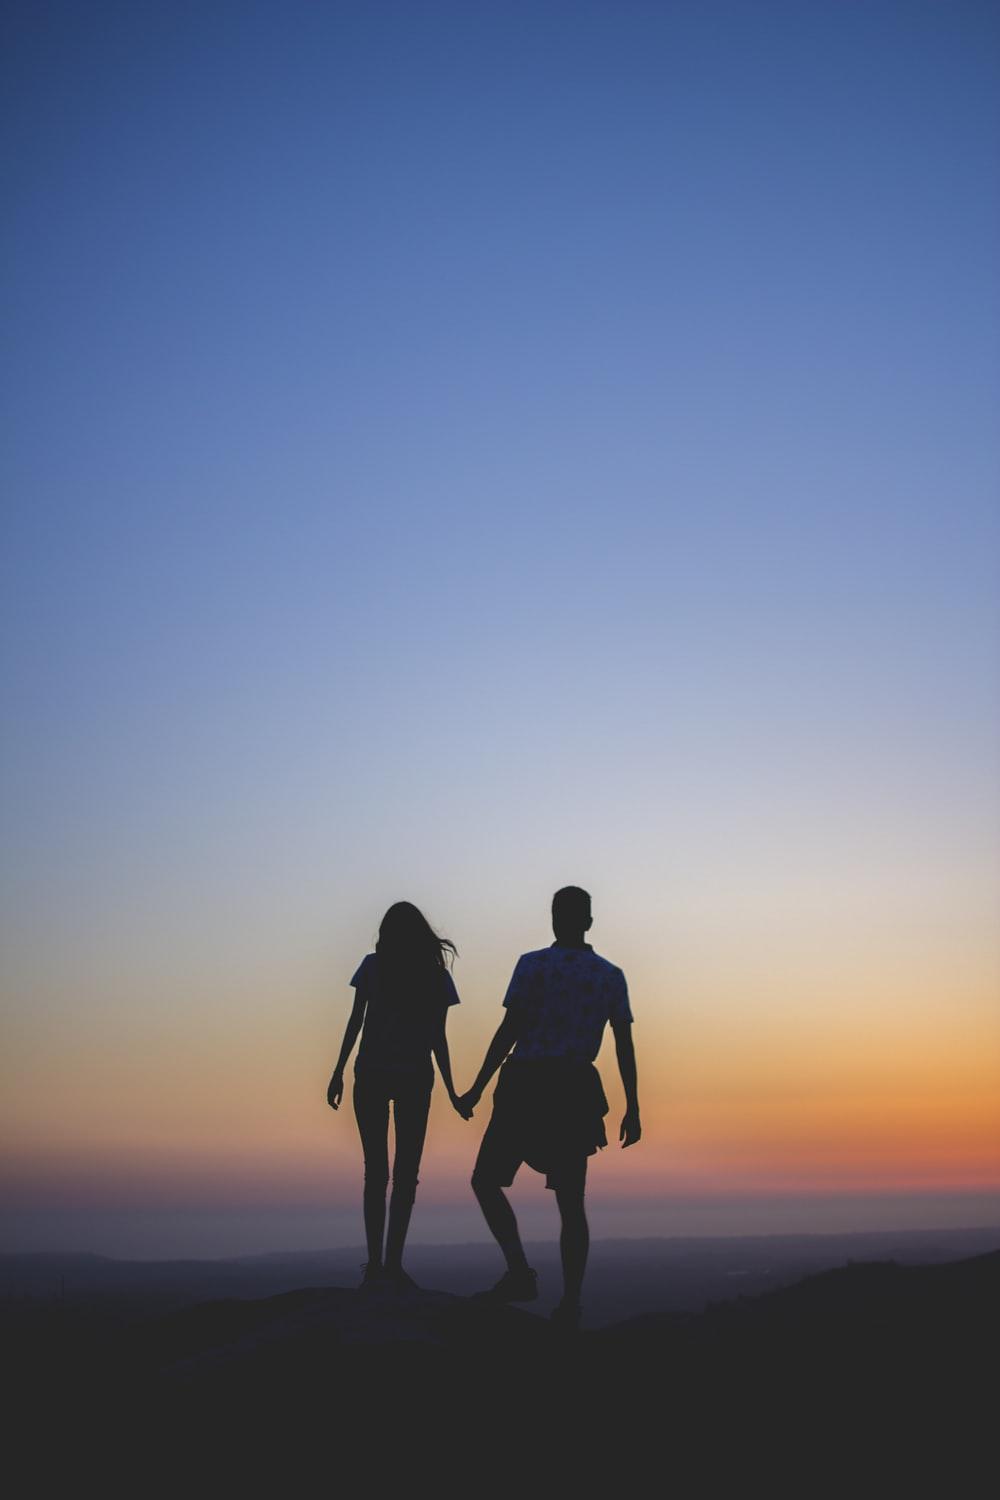 Couple Silhouette Picture. Download Free Image